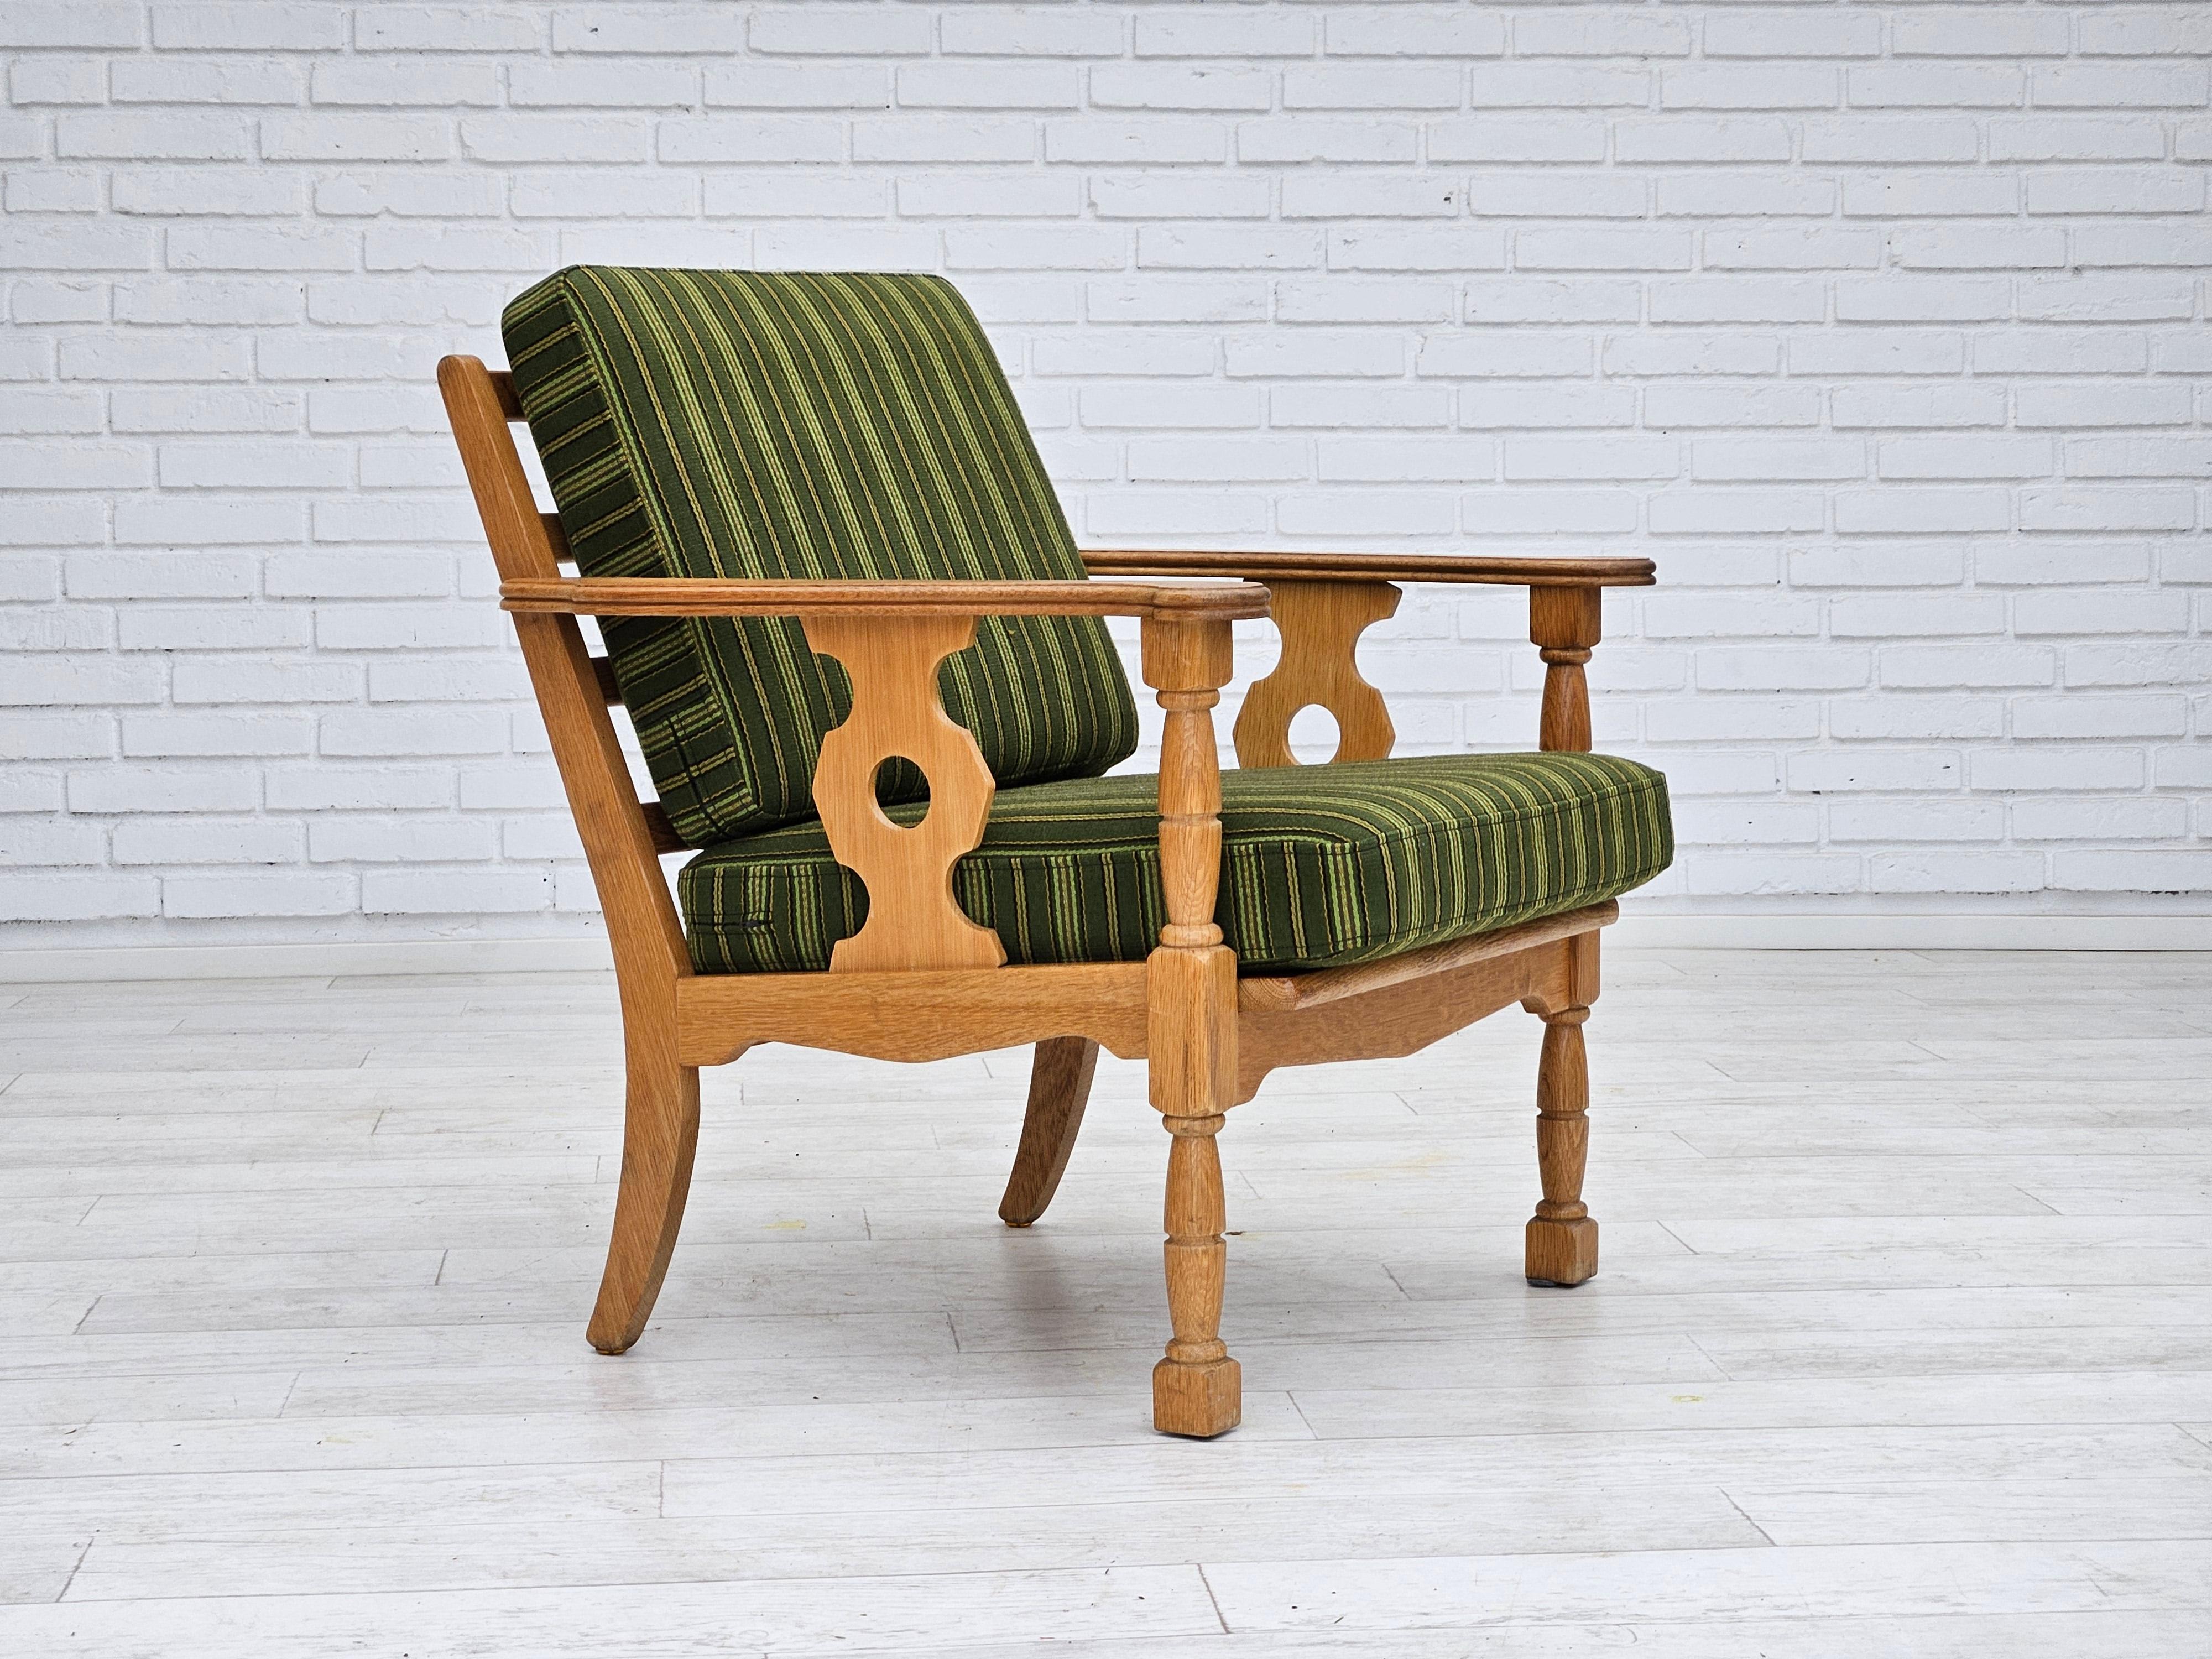 1970s, Danish armchair in original very good condition: no smells and no stains. Green furniture wool fabric, oak wood. Springs in the seat and back cushions. Manufactured by Danish furniture manufacturer in about 1975s.